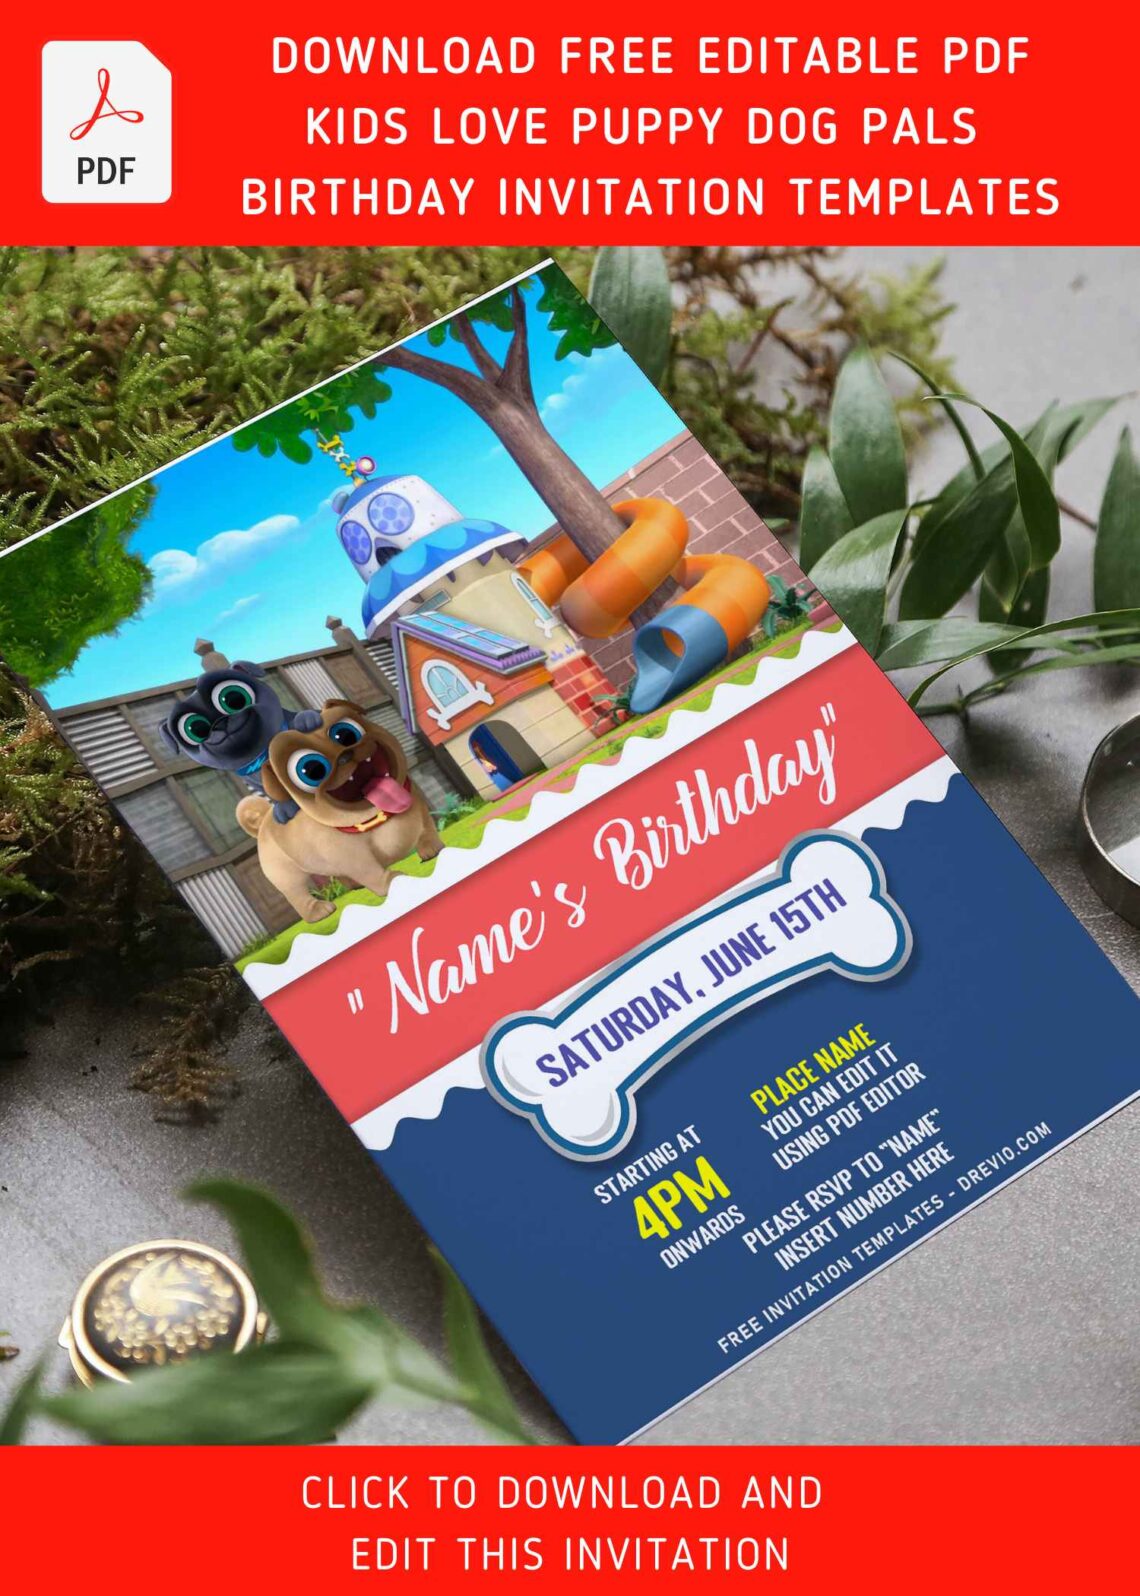 (Free Editable PDF) Disney Inspired Puppy Dog Pals Birthday Invitation Templates with bingo and rolly